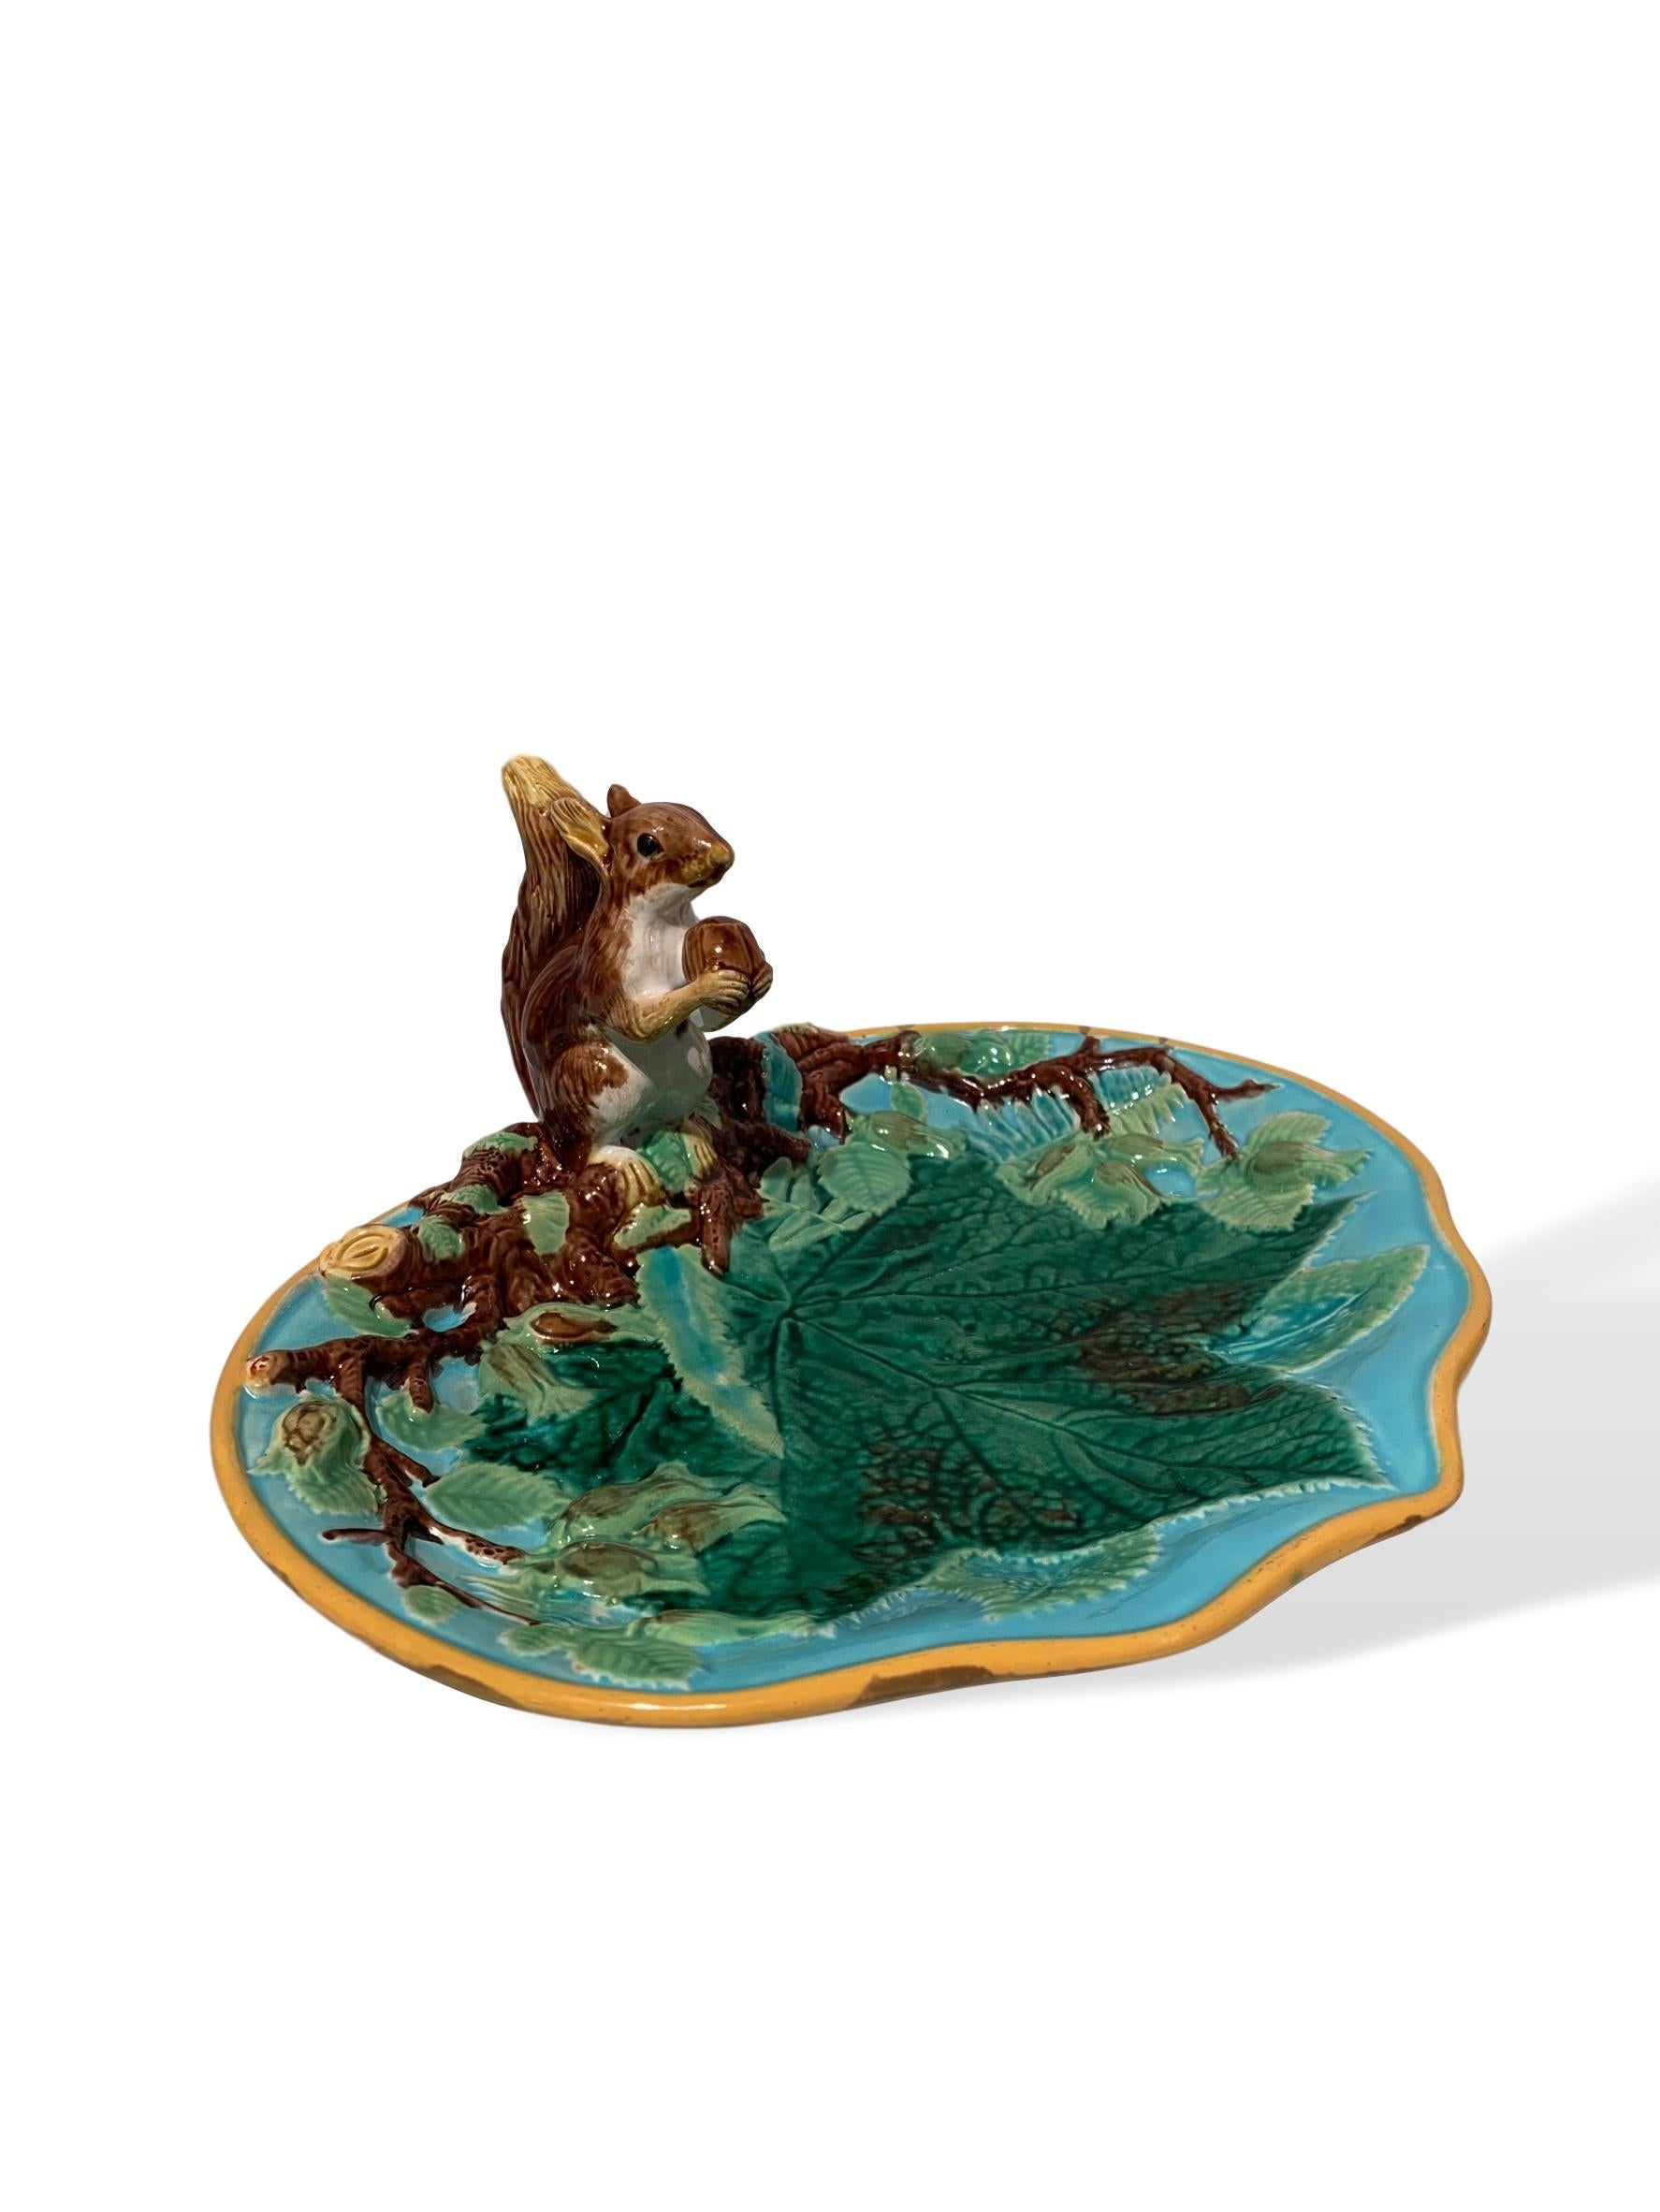 George Jones Majolica squirrel nut dish, English, circa 1870, molded with leaves, ferns and hazelnut blossoms, with applied naturalistic model of a crouching squirrel with a hazelnut in his mouth. This beautifully glazed and crisply molded dish has